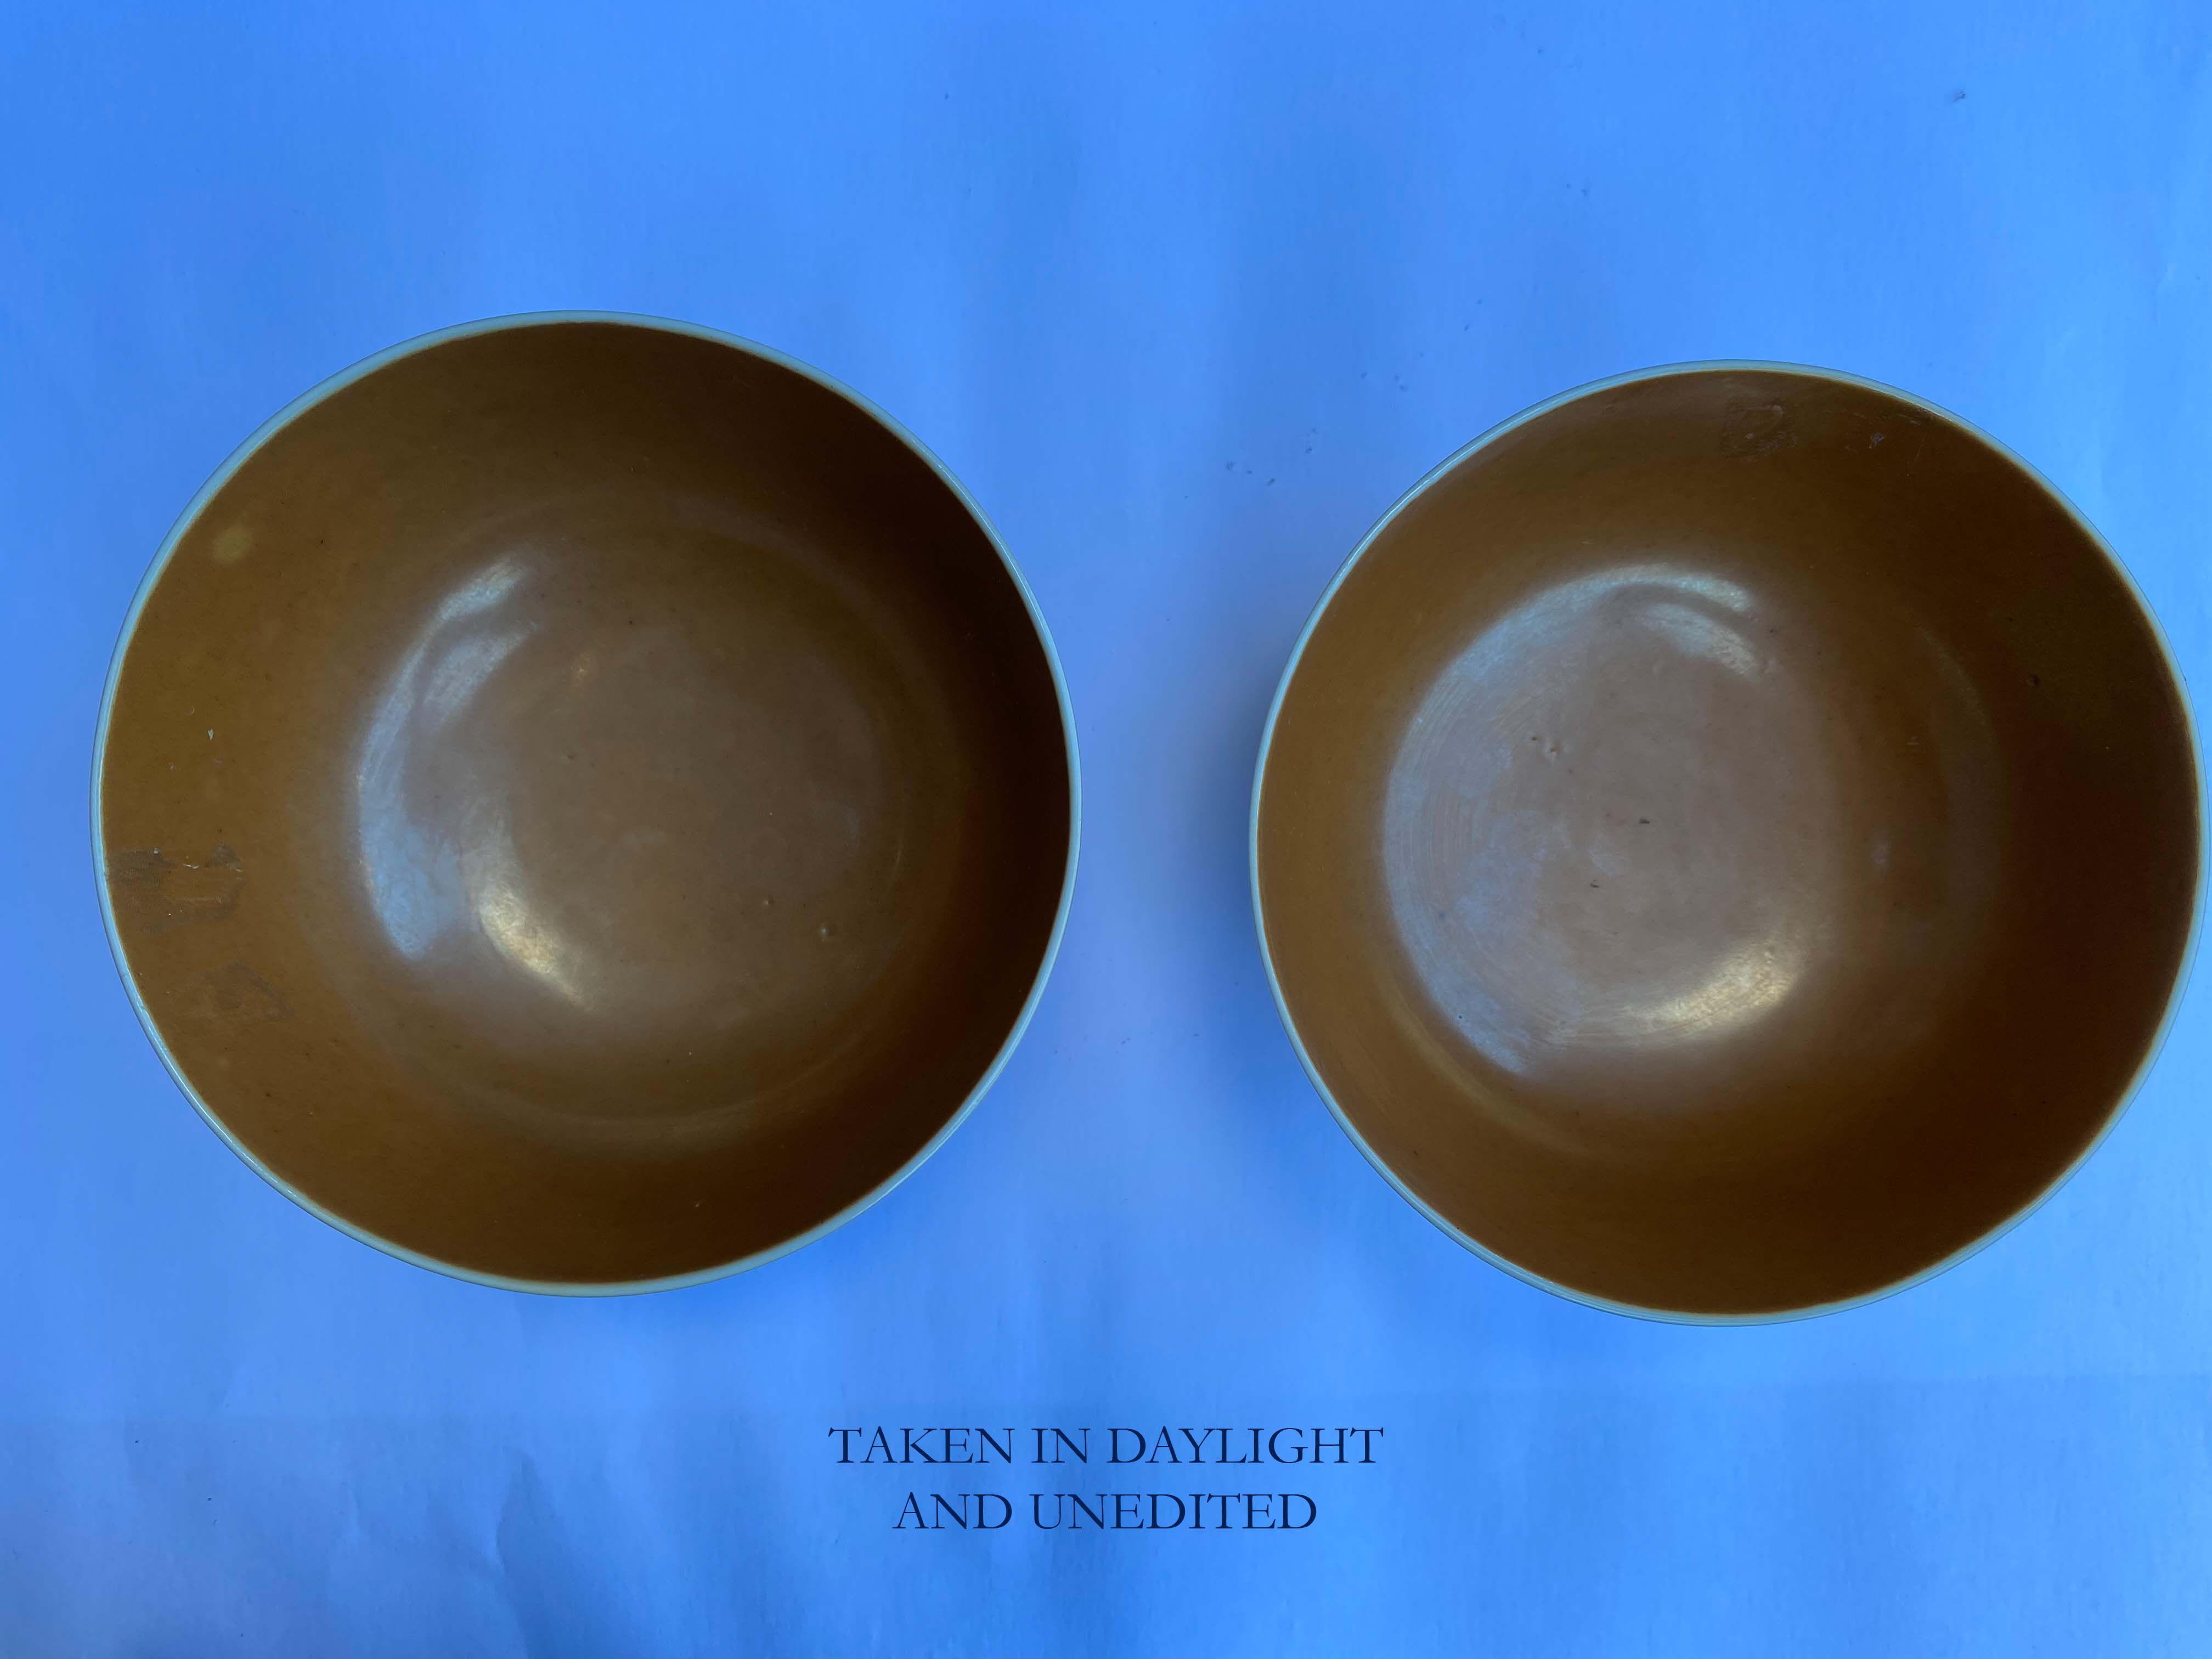 A PAIR OF CHINESE CAFE-AU-LAIT GLAZED BOWL, GUANGXU MARK AND PERIOD (1875-1908) - Image 2 of 9